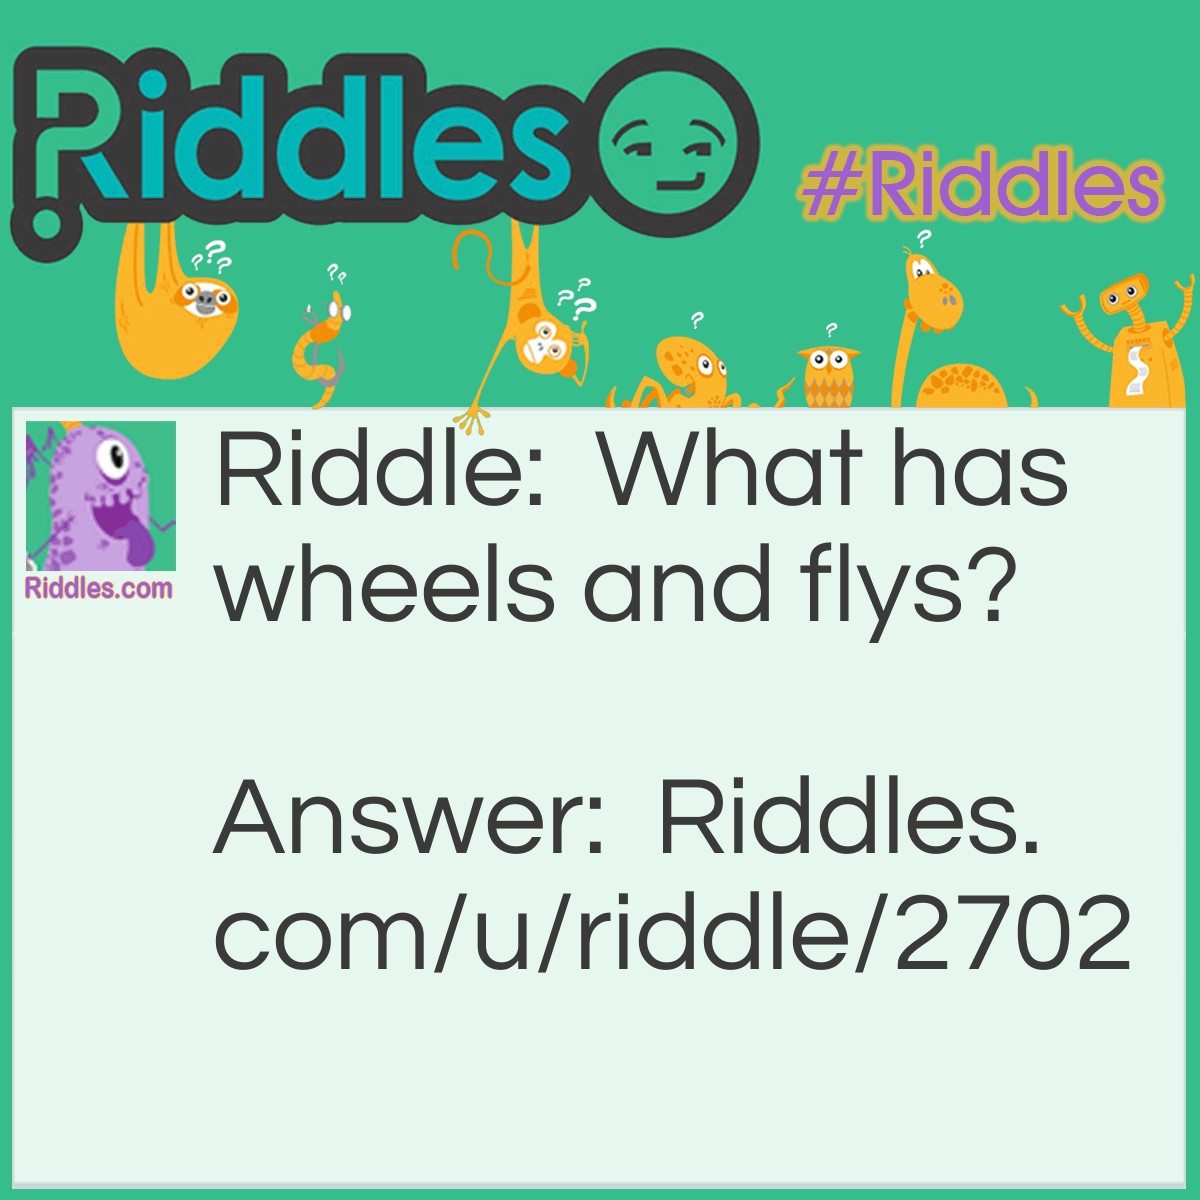 Riddle: What has wheels and flys? Answer: A Dump truck! Because 'flys' can also be spelt 'flies'